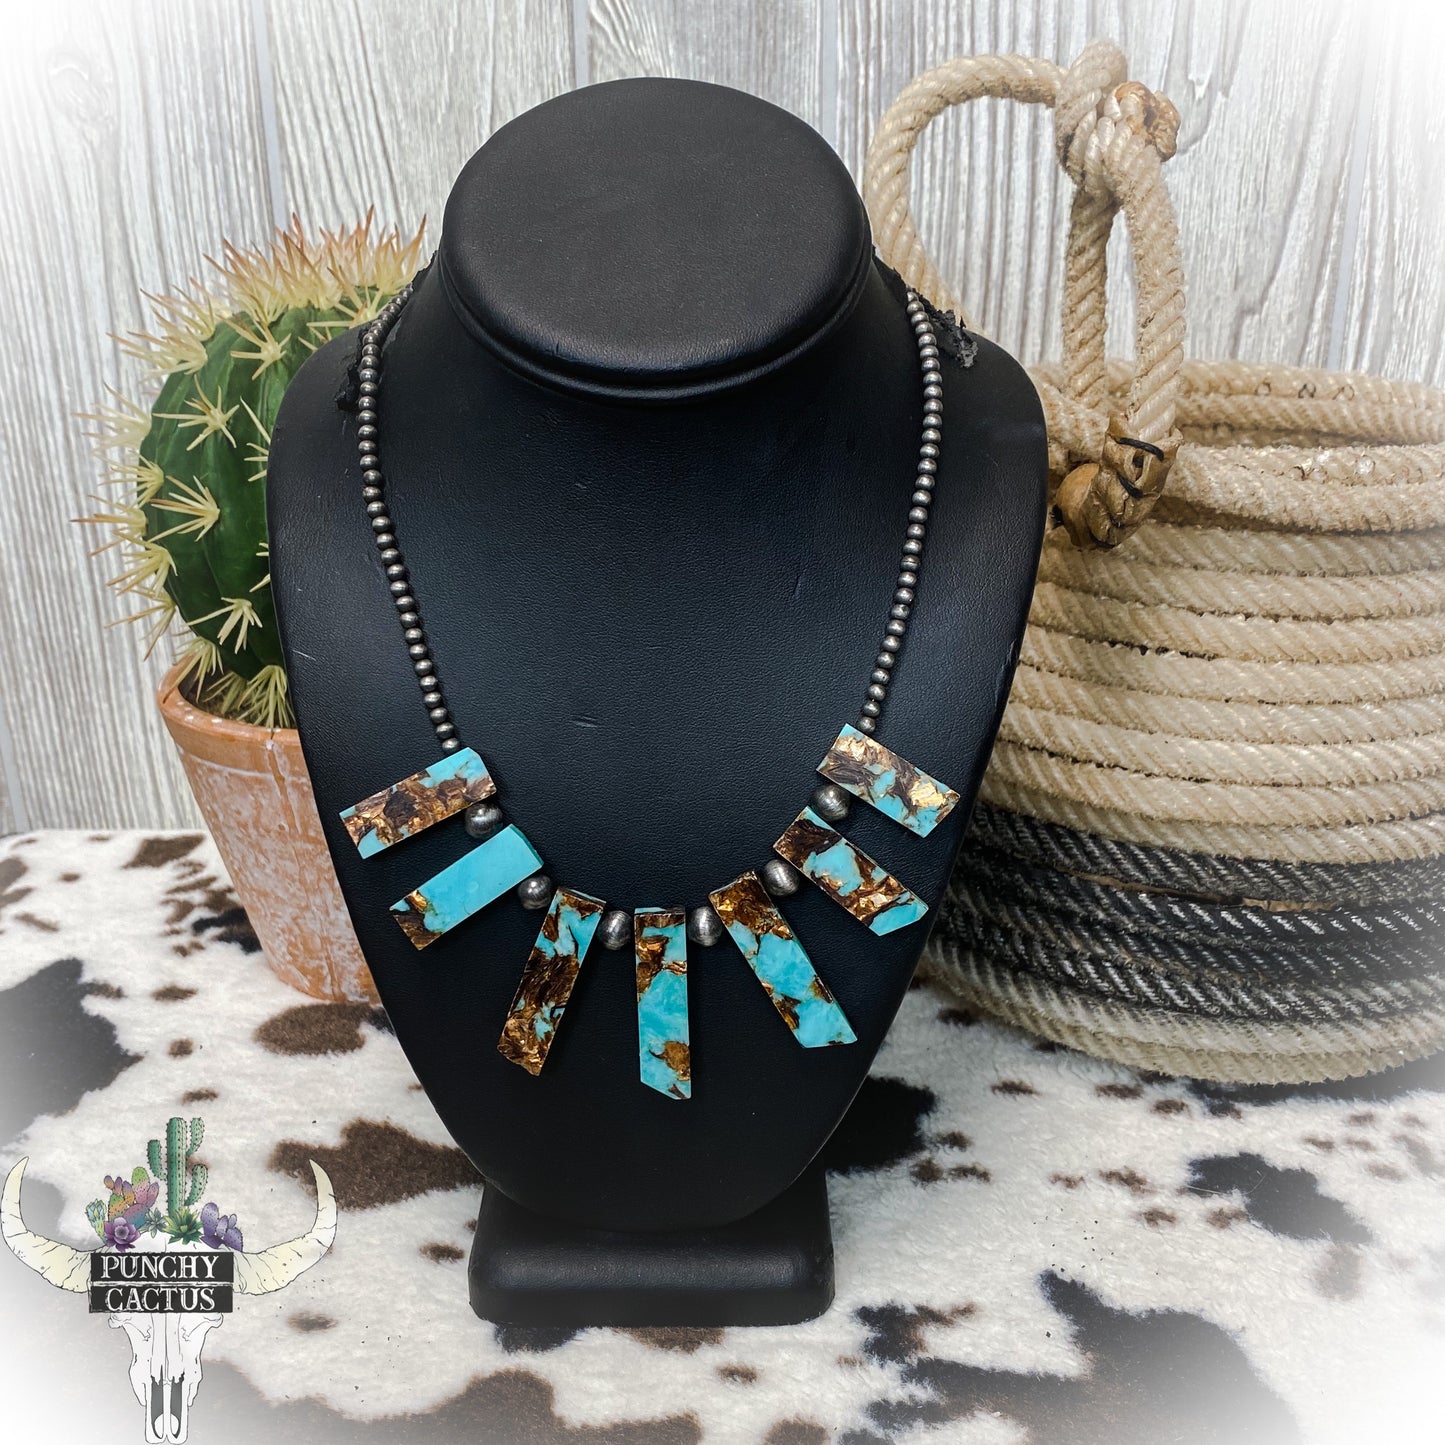 western navajo pearl necklace with large turquoise stones statement necklace